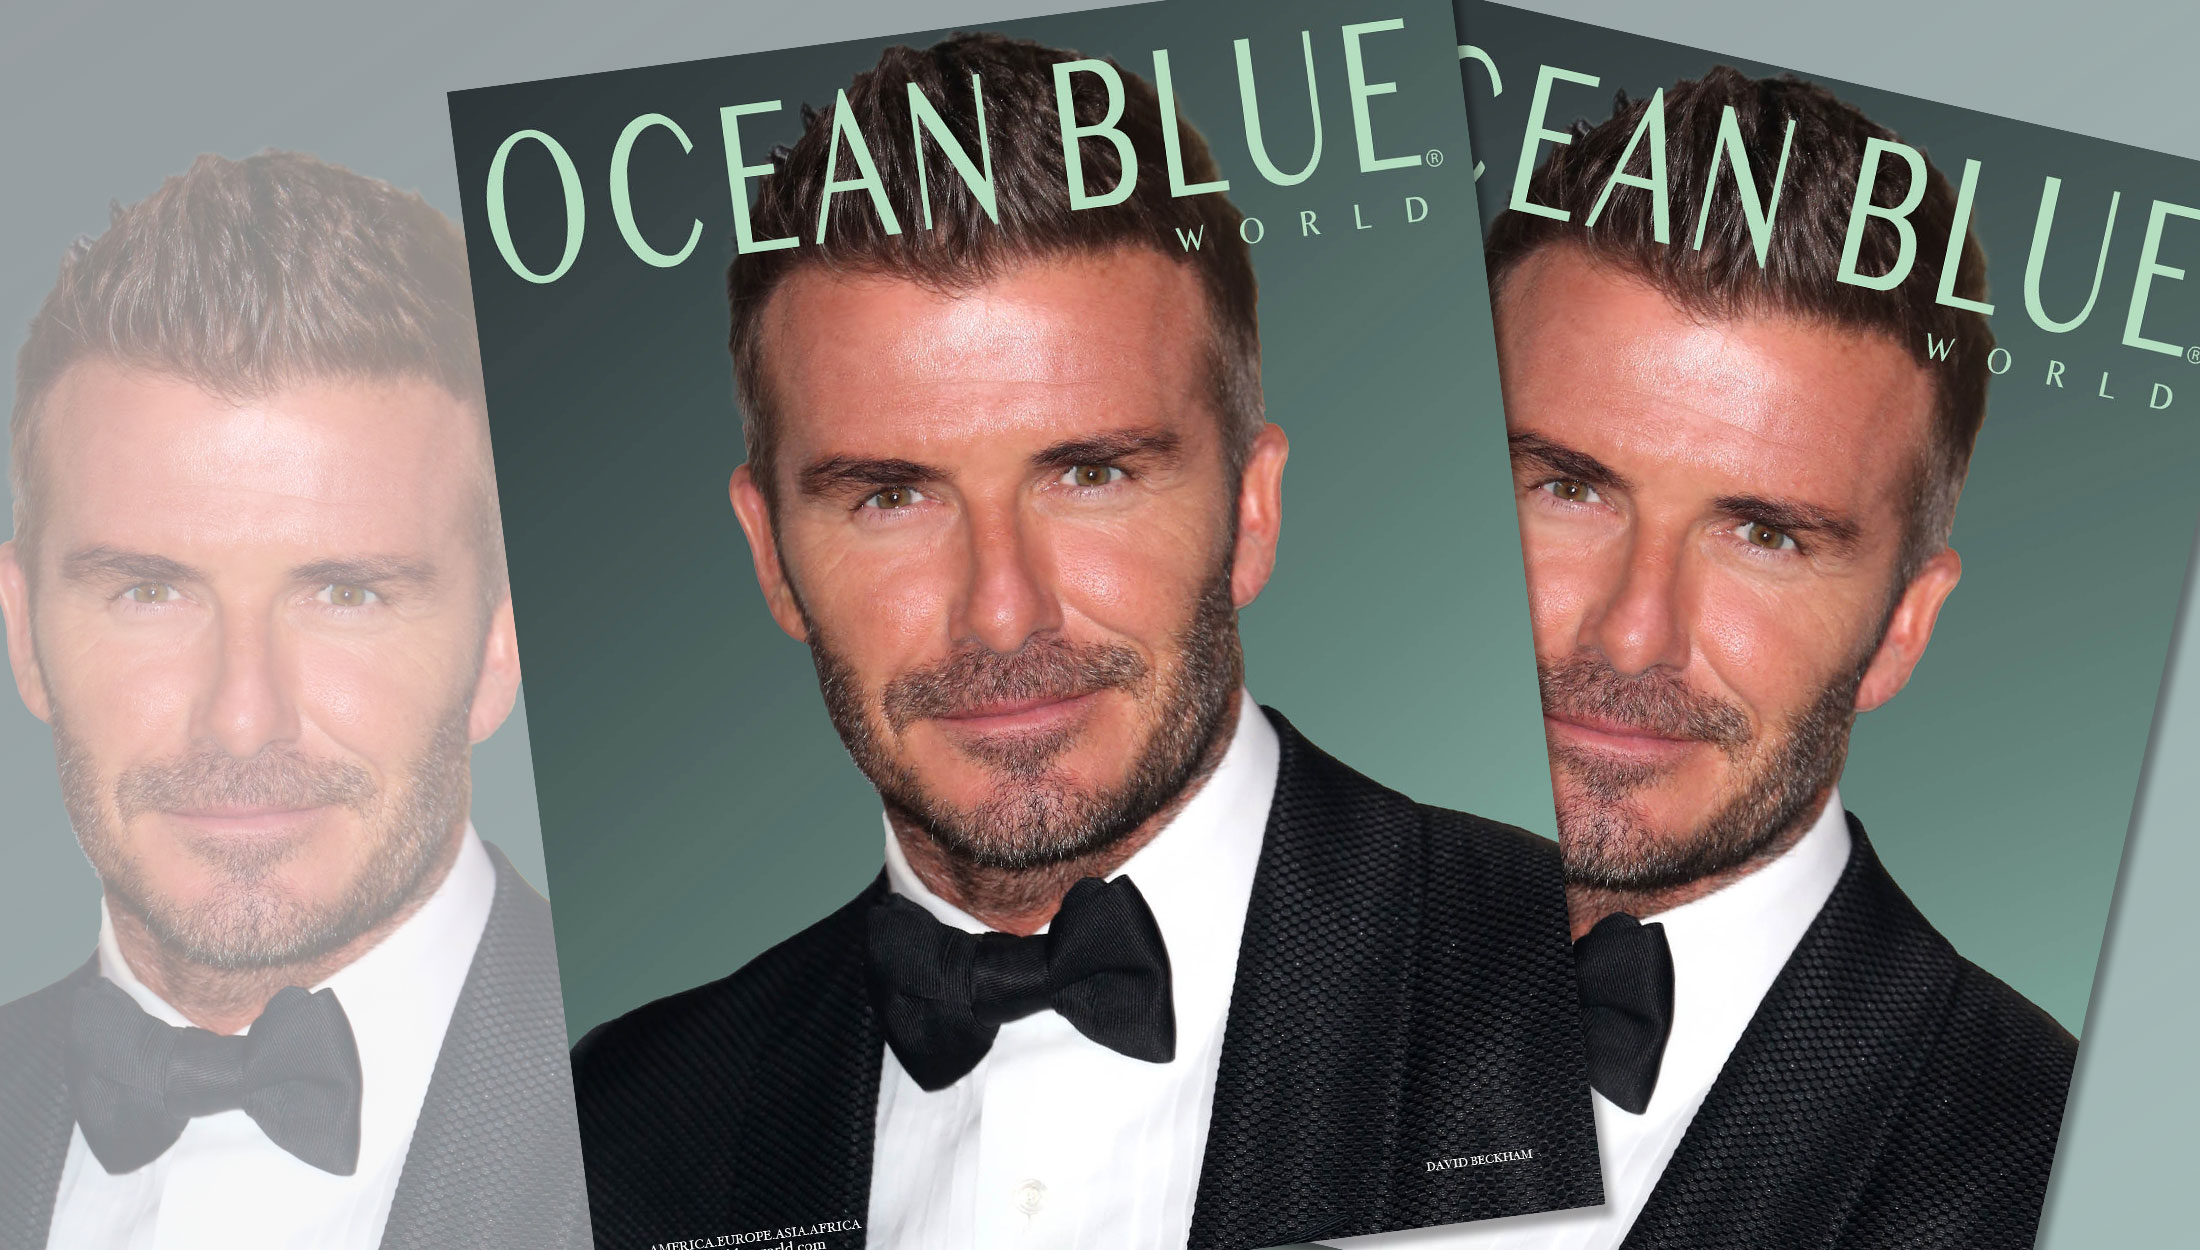 JUST RELEASED! OCEAN BLUE’S 34TH EDITION!